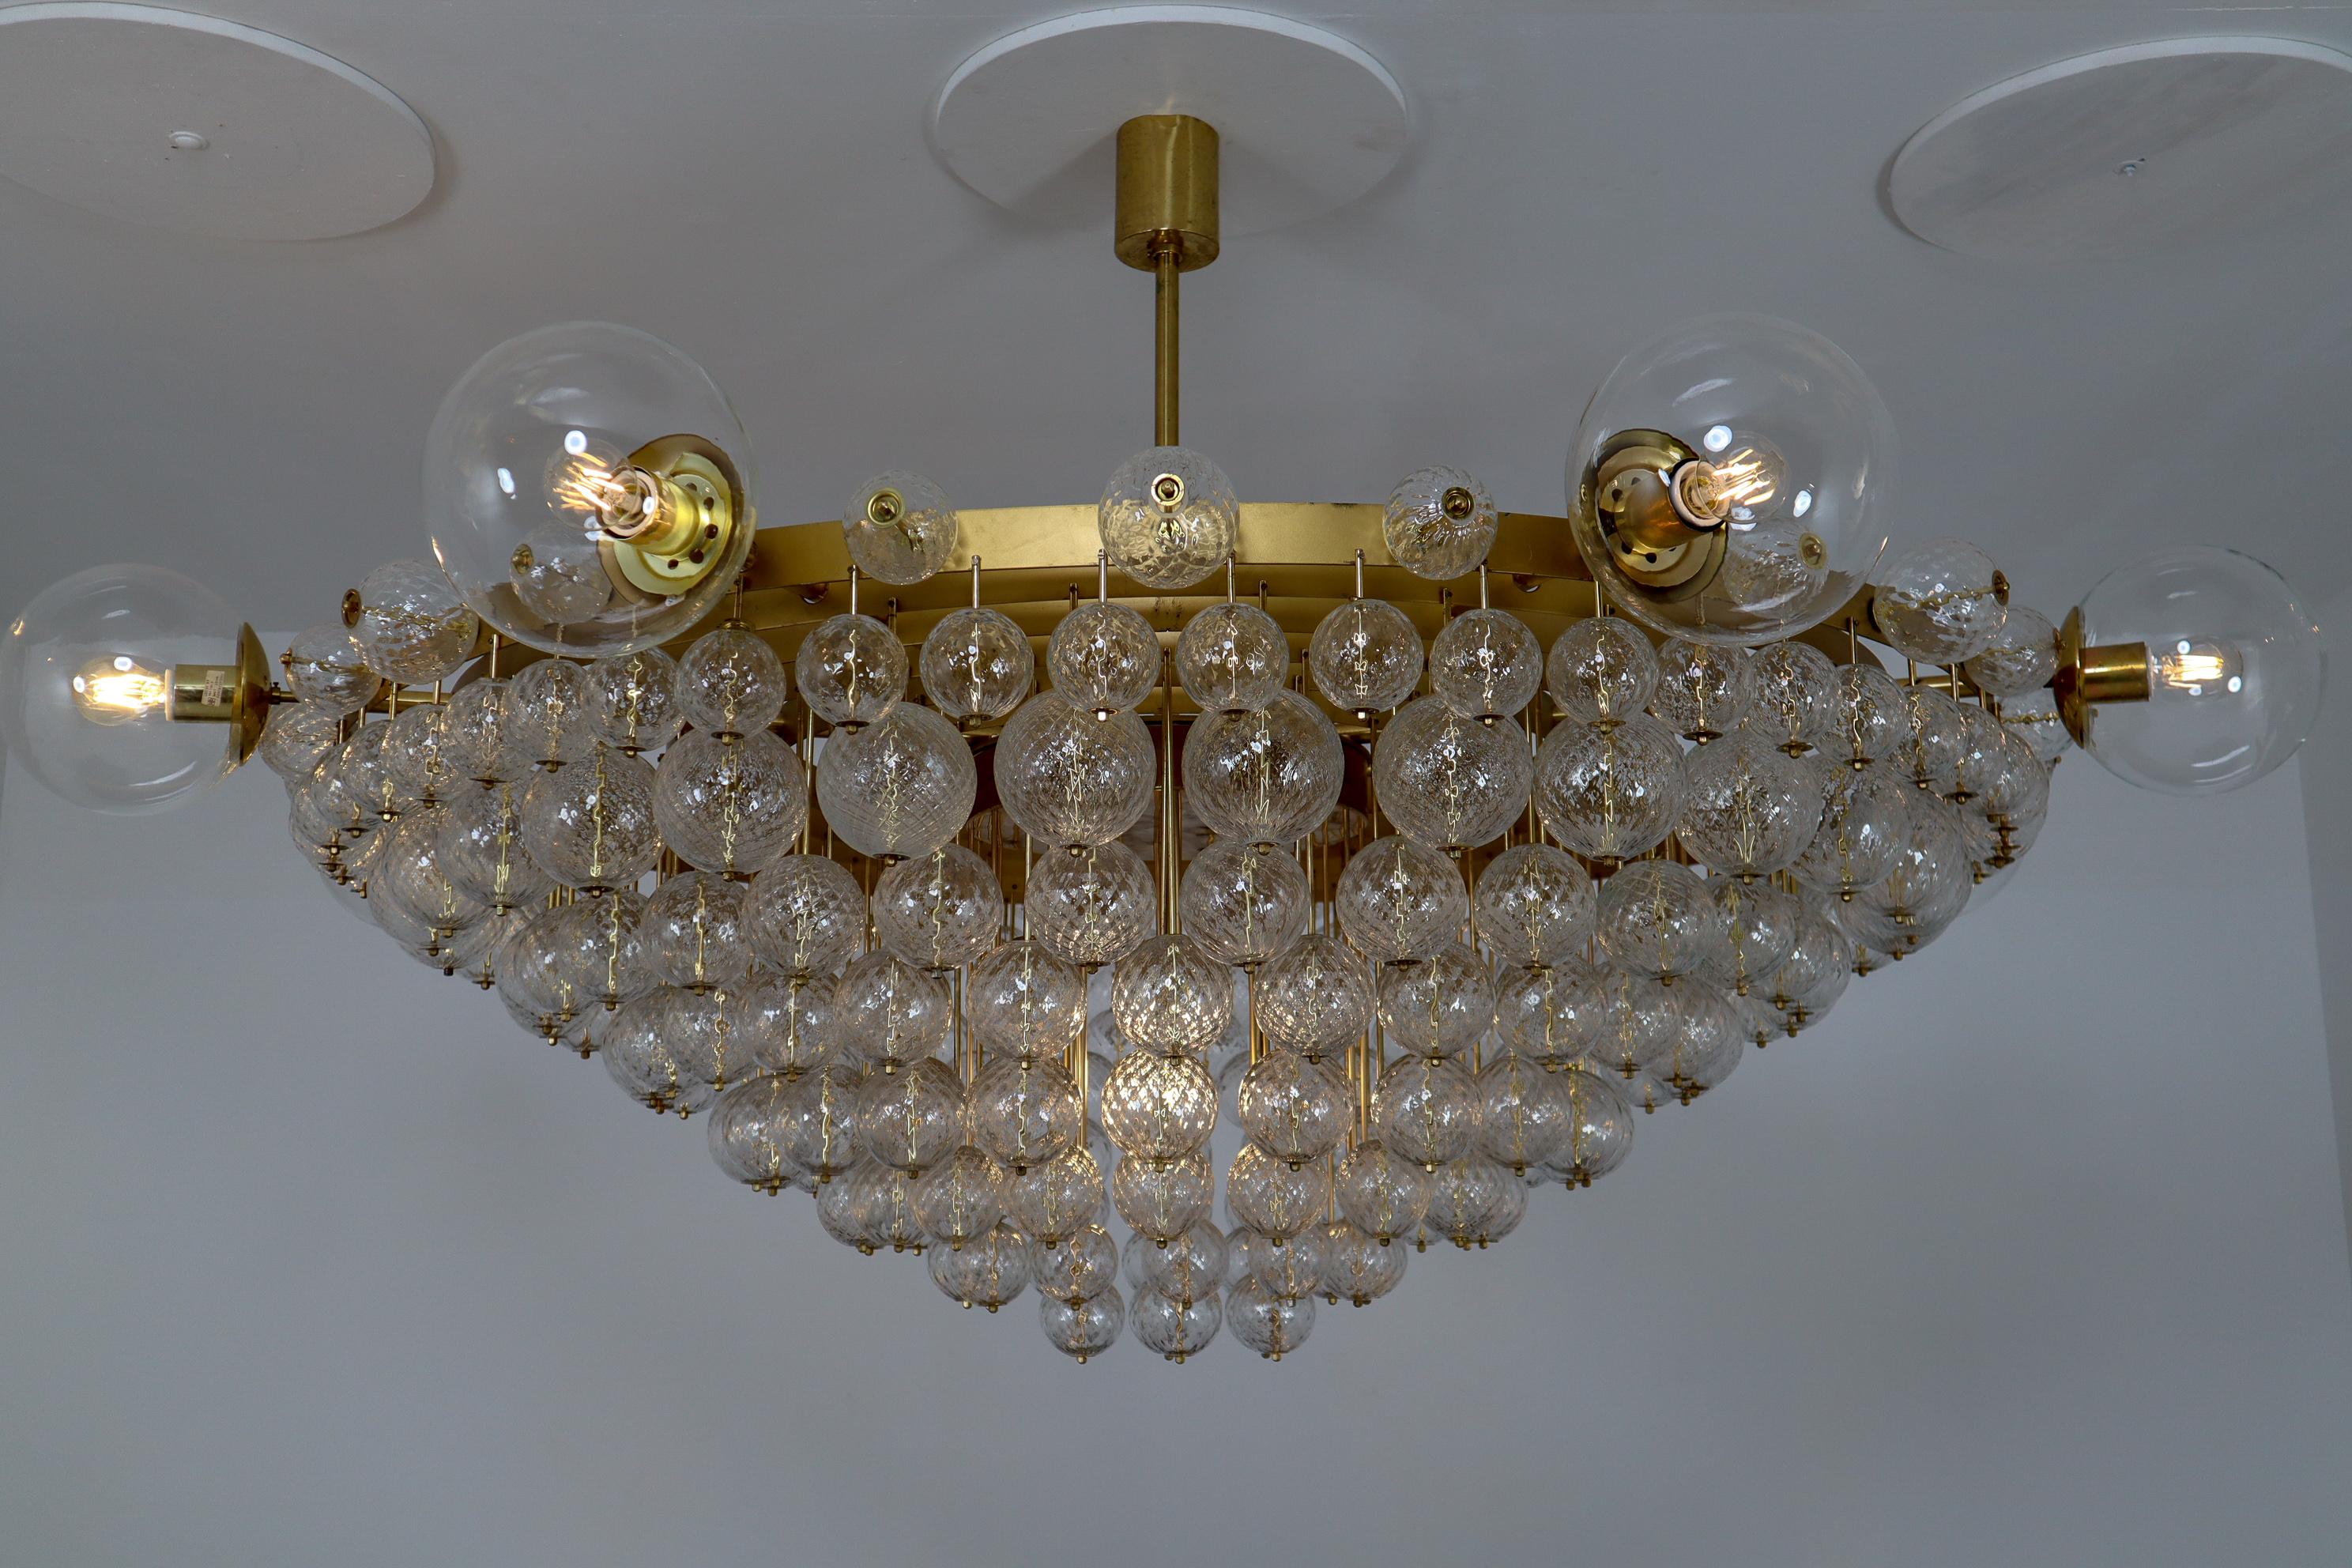 Extremely Large Hotel Chandelier with Brass Fixture and Structured Glass Globes 2